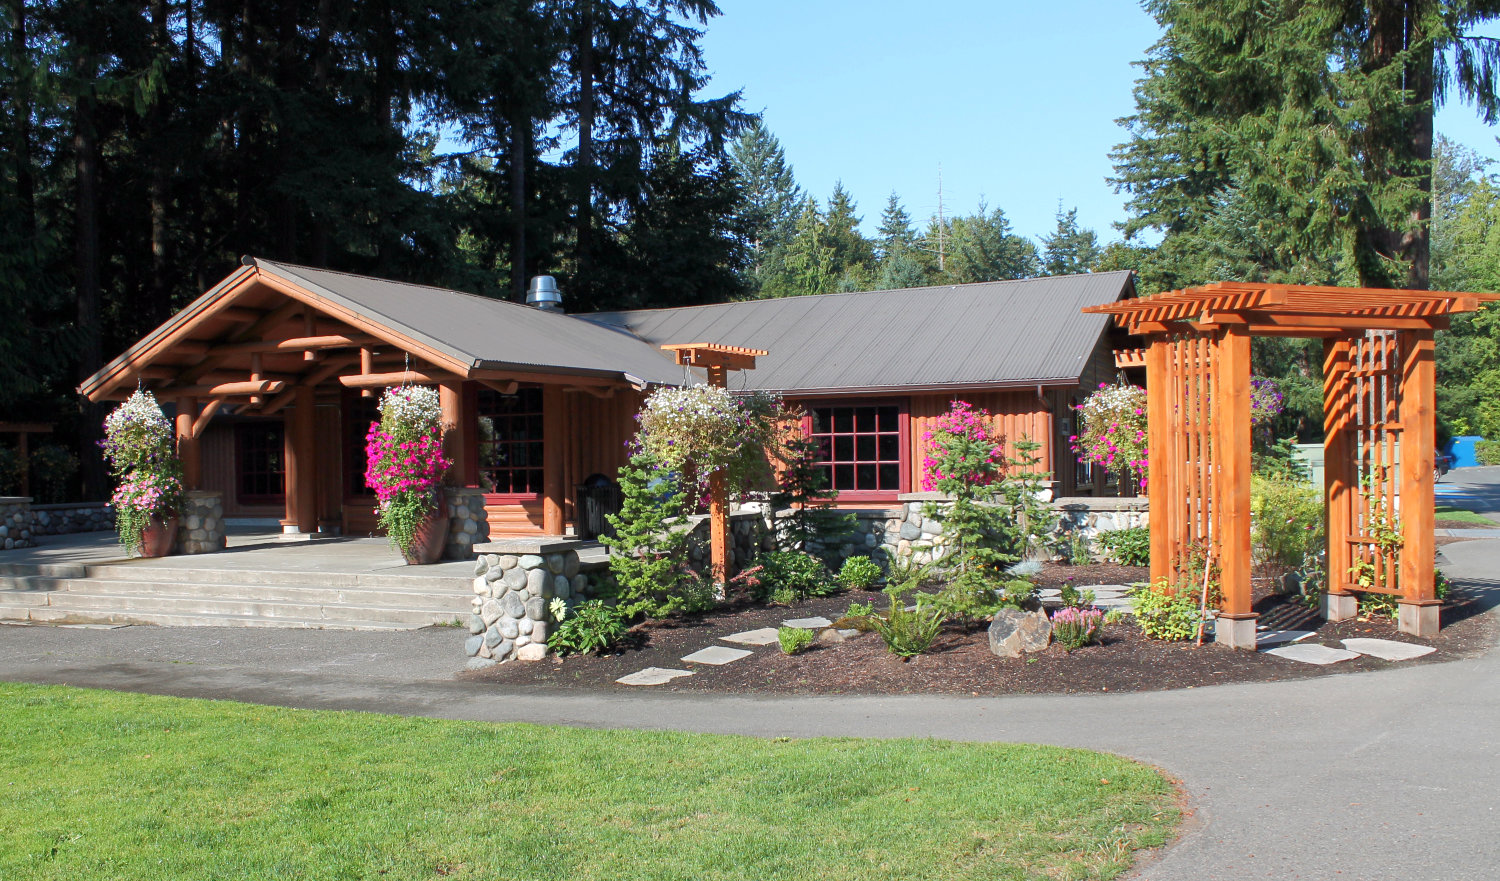 Exterior of Beaver Lake Lodge showing front entrance lined by welcoming giant vases and hanging baskets full of flowers. Small landscaped area in front has small plants, stepping stones, and a wooden arbor.